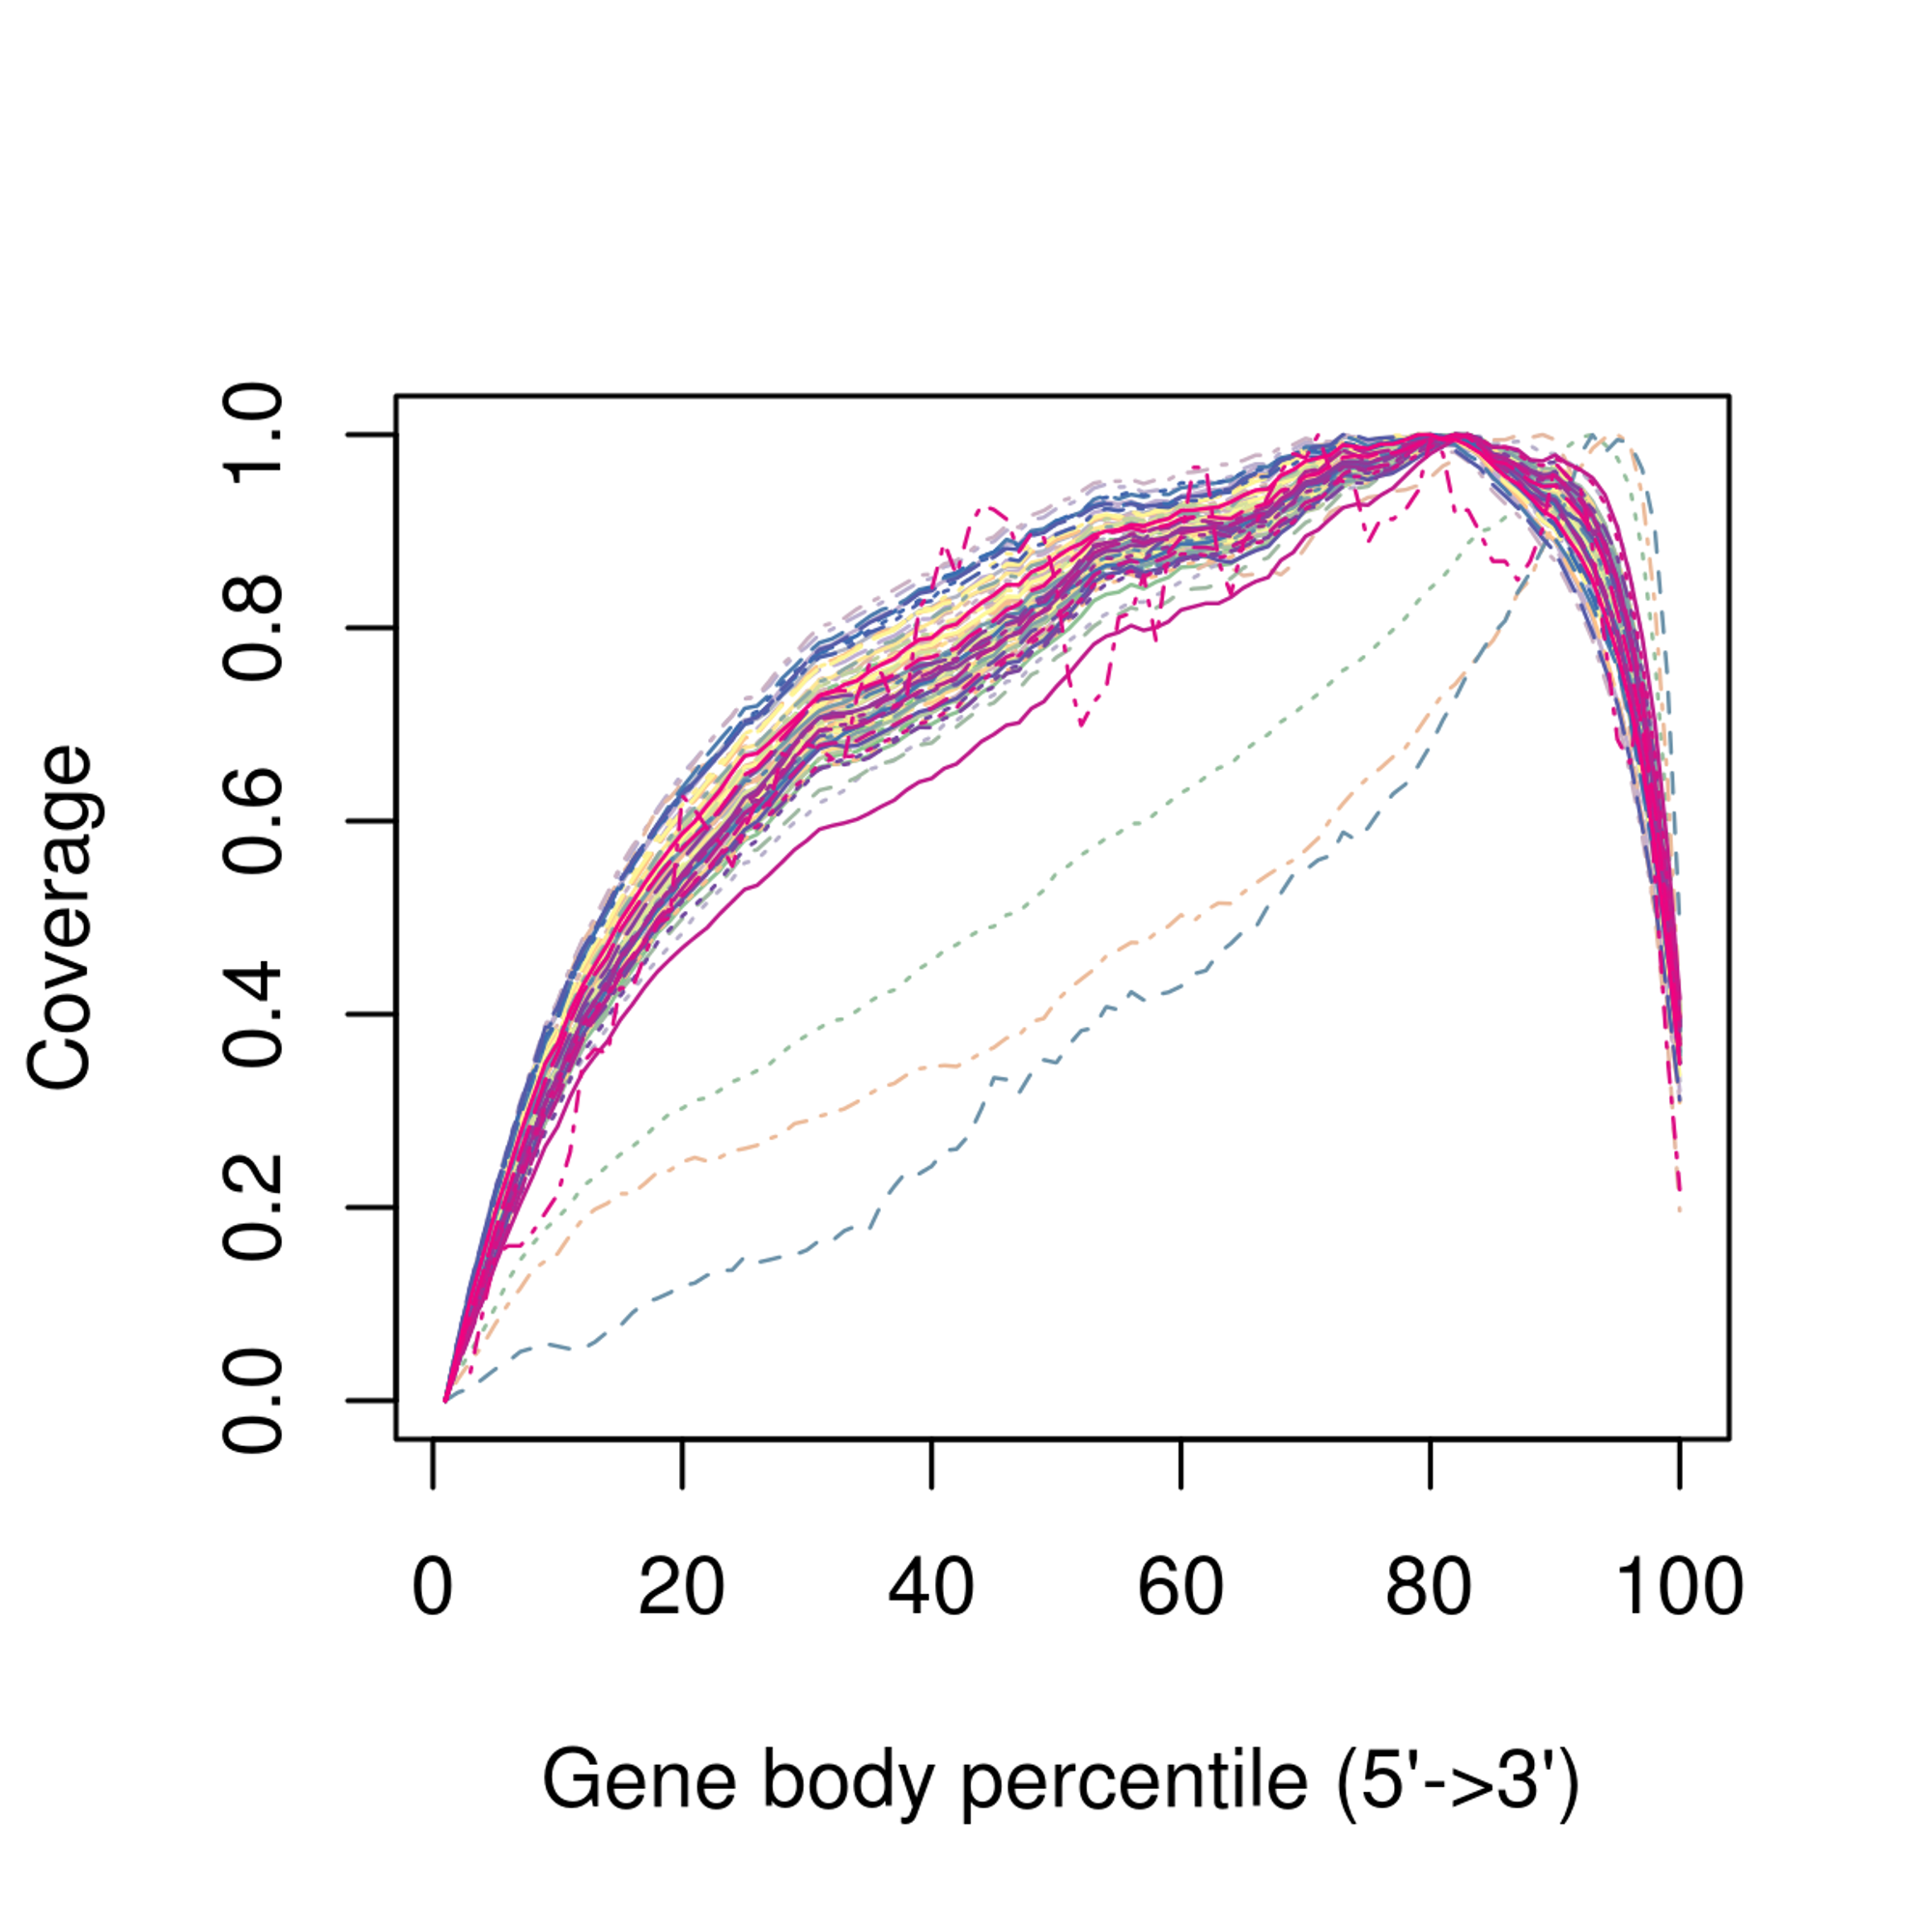 Example of 3’ bias in the gene body coverage, after aligning the sequencing reads to the transcriptome. 